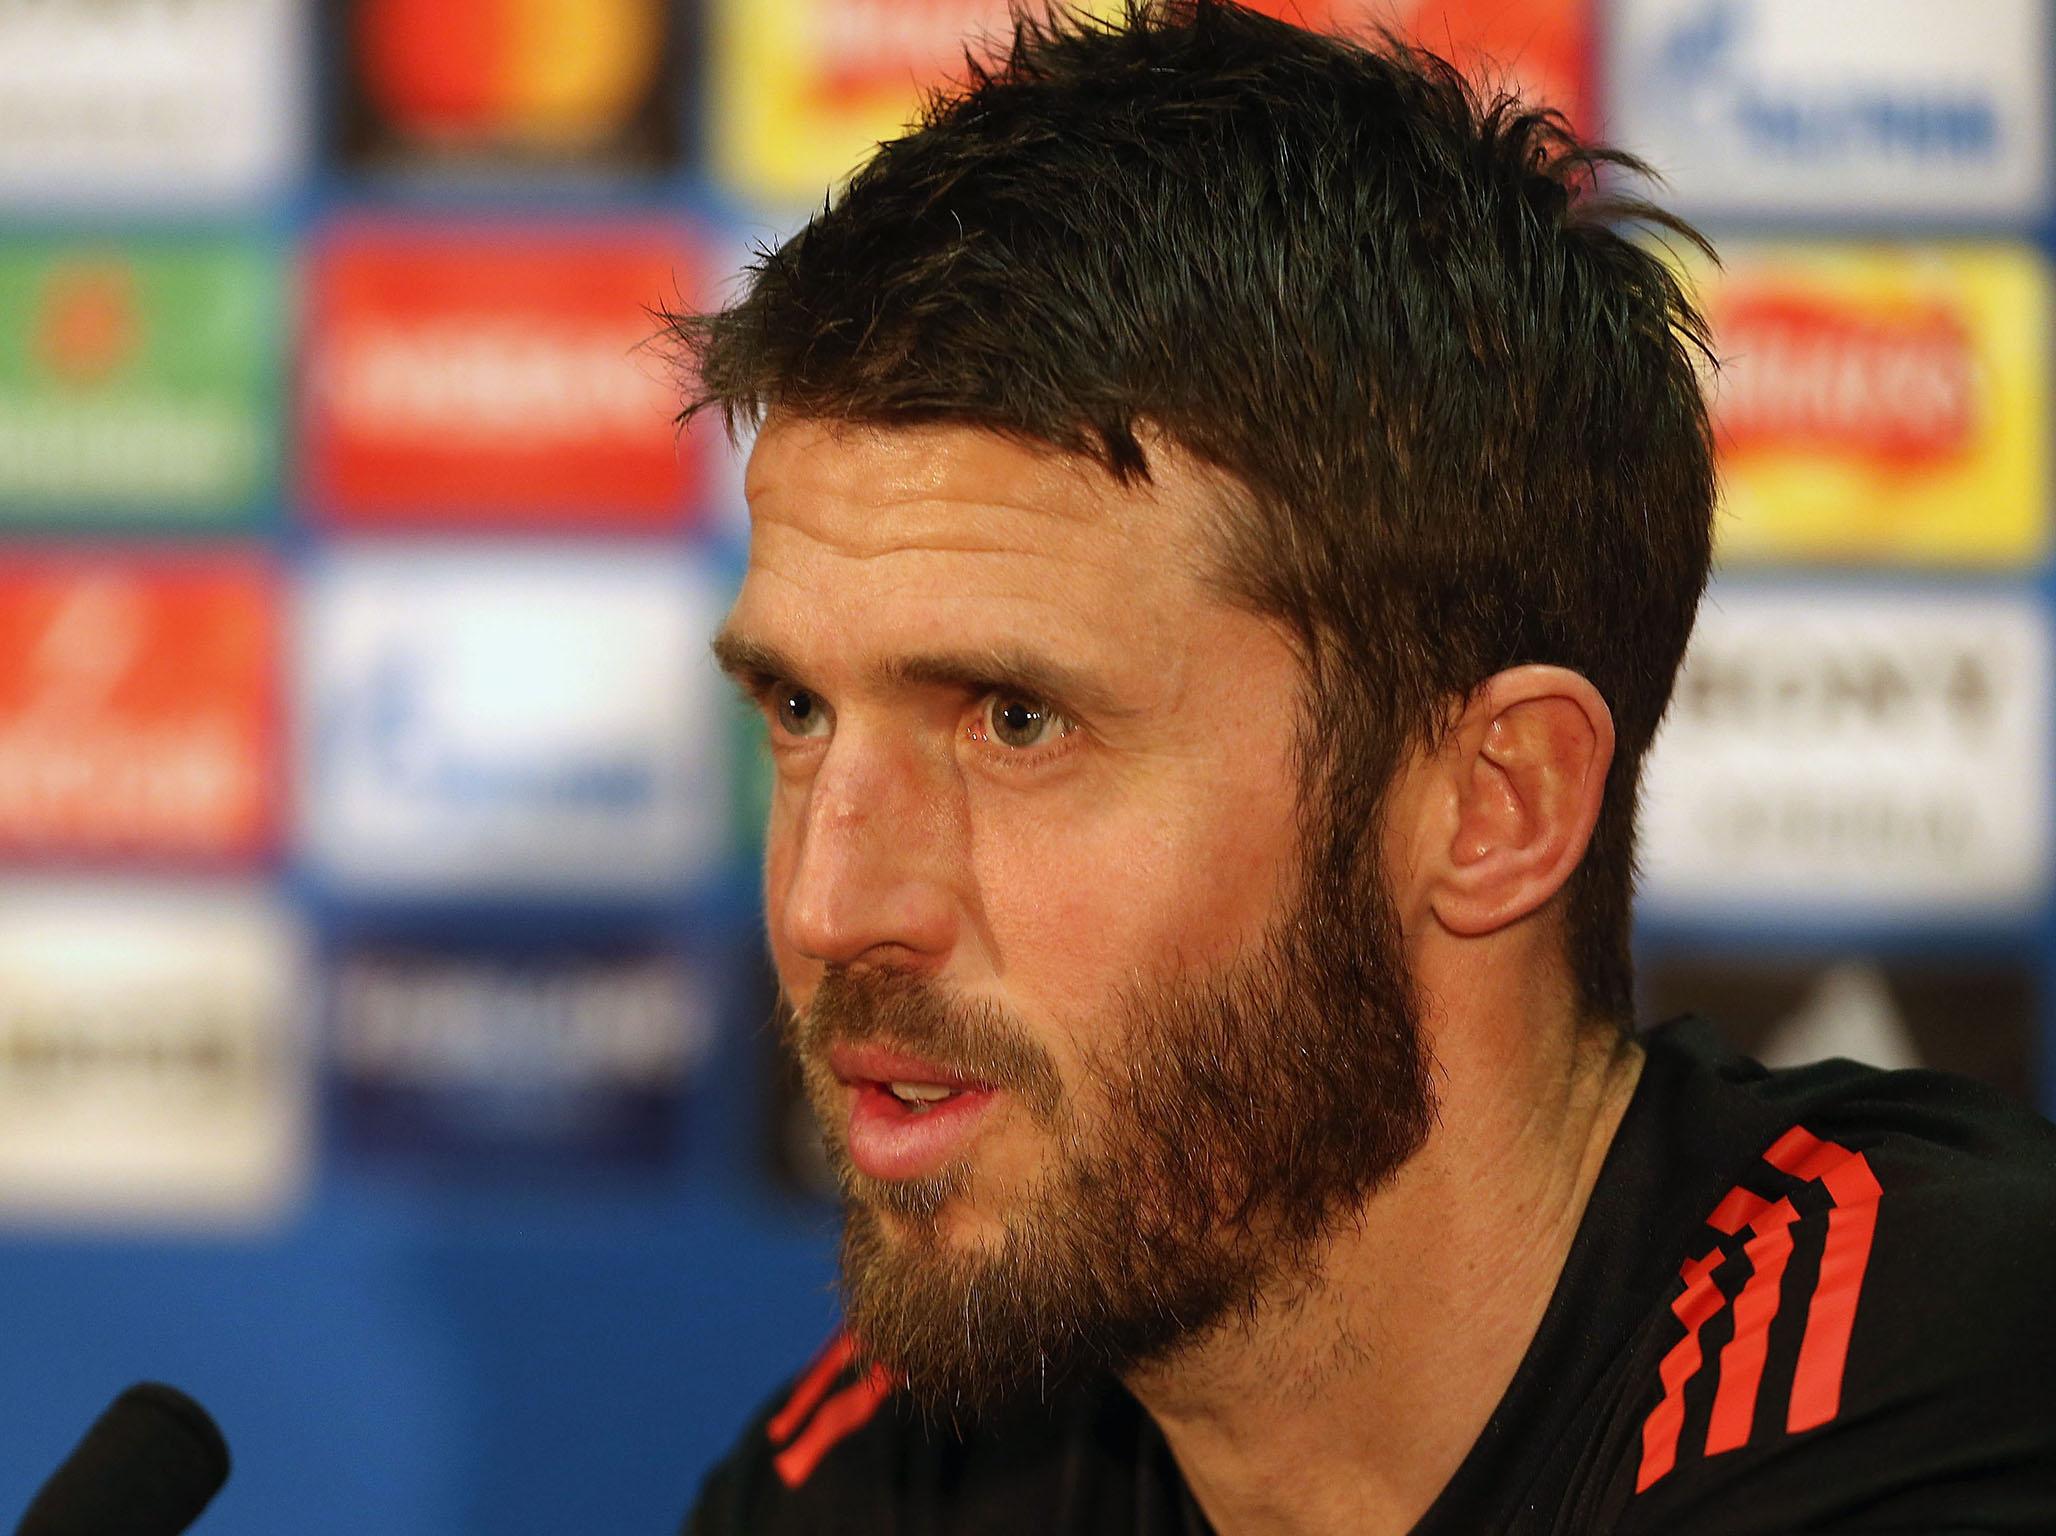 Michael Carrick speaks to reporters at Old Trafford